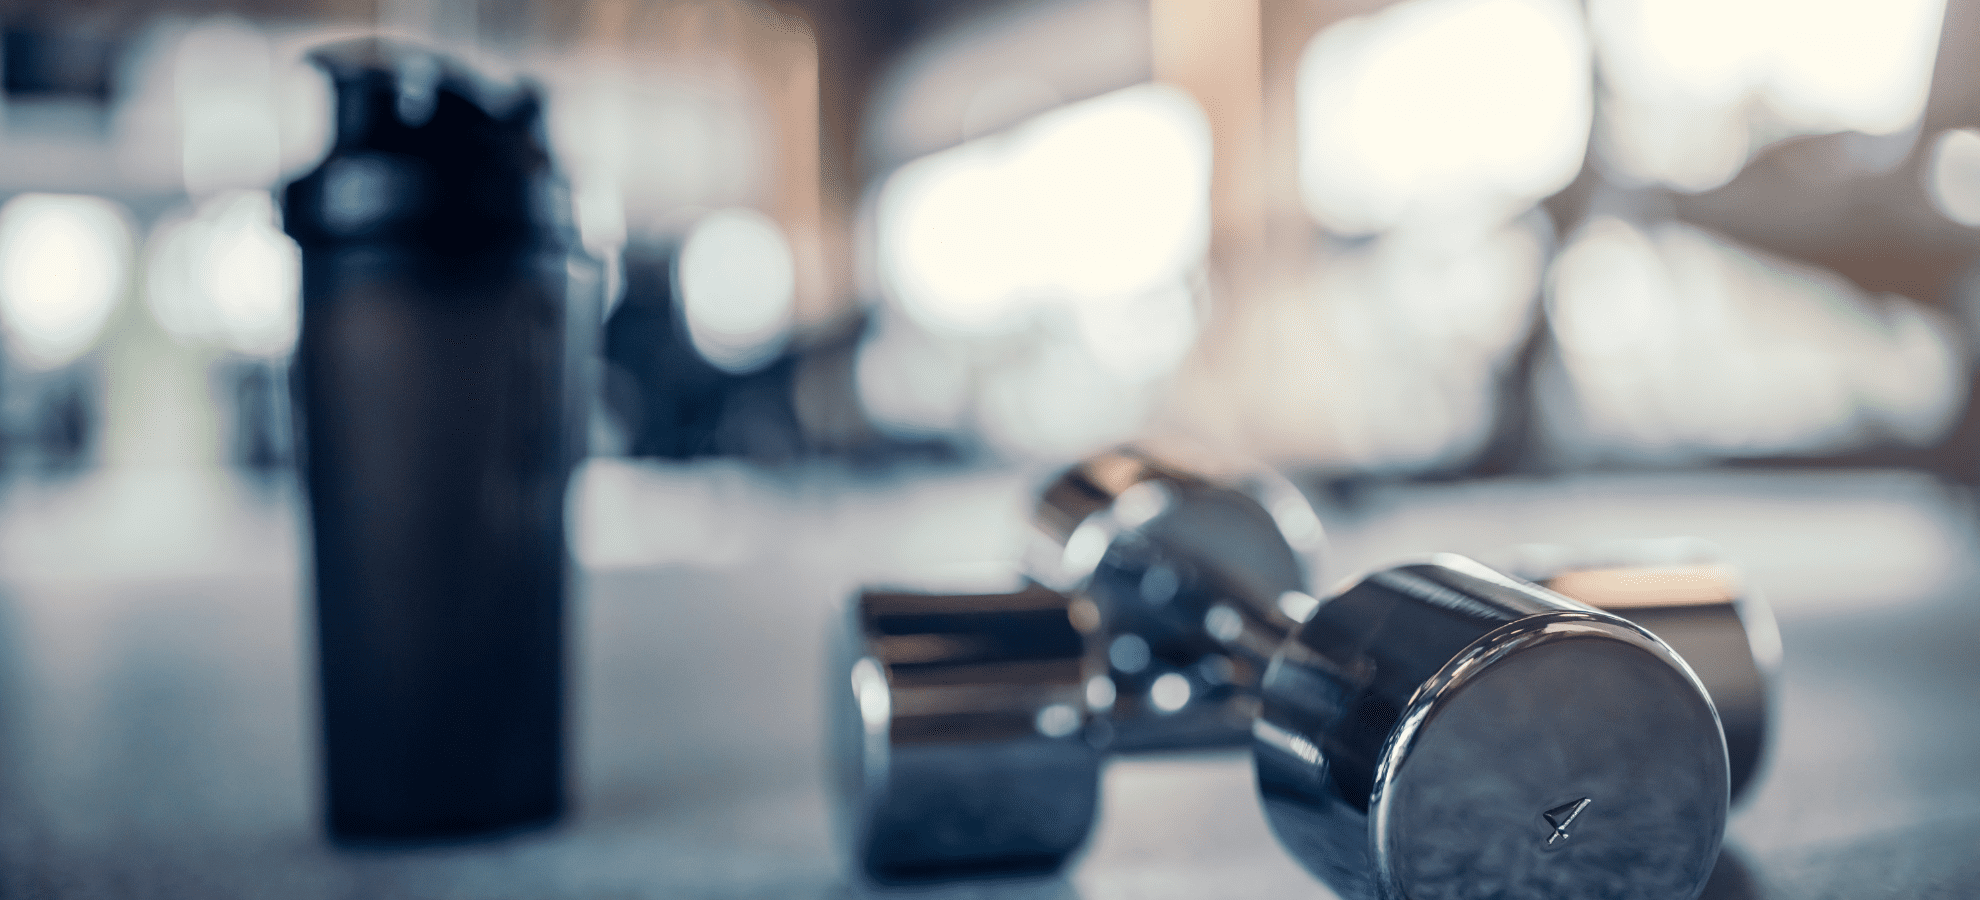 dumbells in a gym and a water tumbler